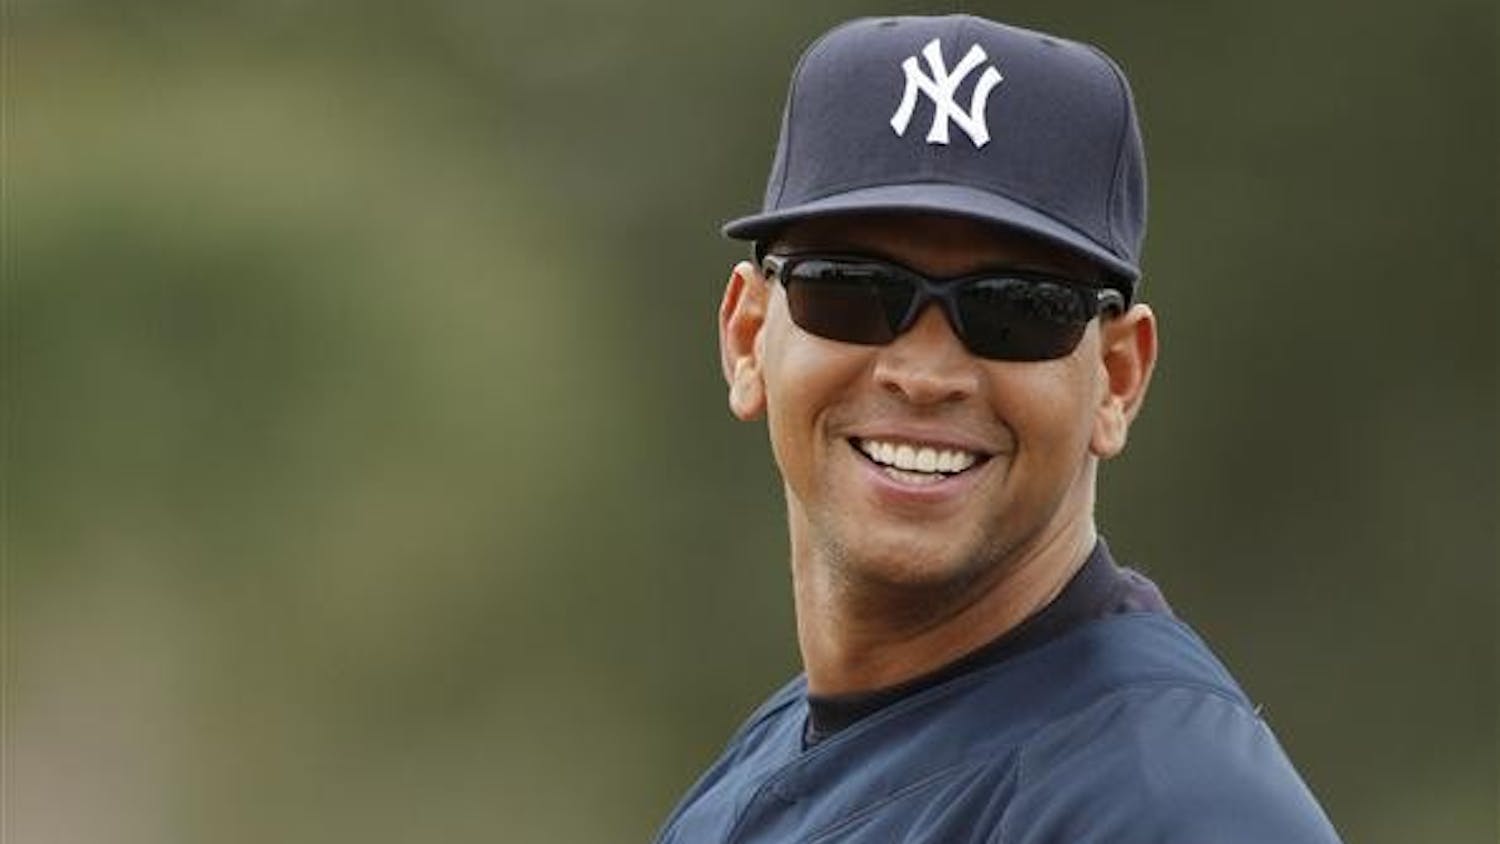 In this February 2008 file photo, New York Yankees third baseman Alex Rodriguez glances back at fans while warming up during spring training baseball workouts in Tampa, Fla.